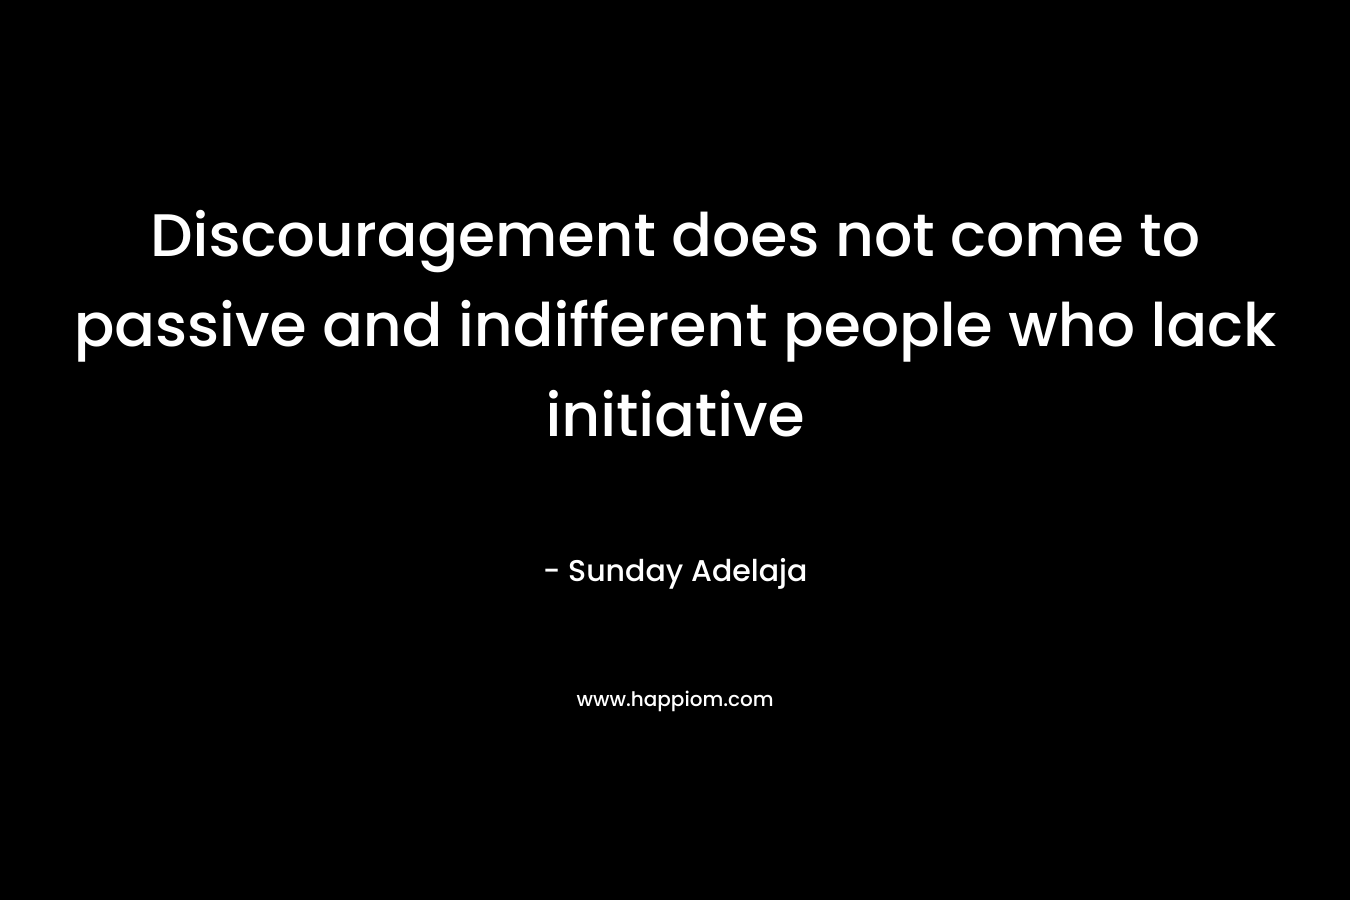 Discouragement does not come to passive and indifferent people who lack initiative